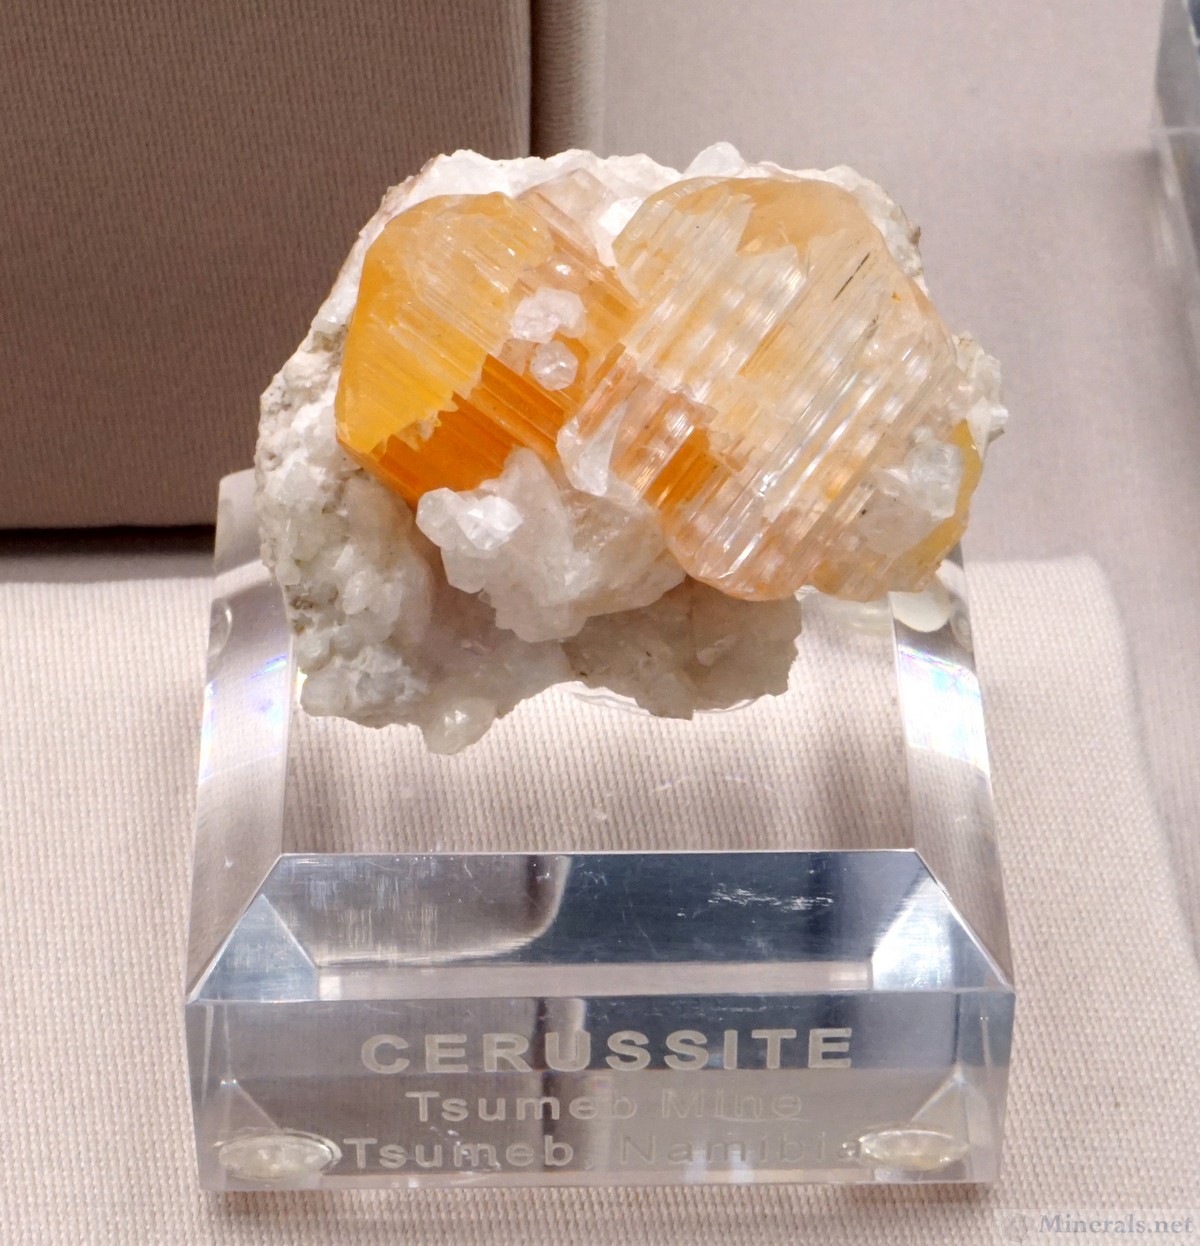 Orange Cerussite from Tsumeb, Namibia, From the Mineralogical Association of Dallas Case